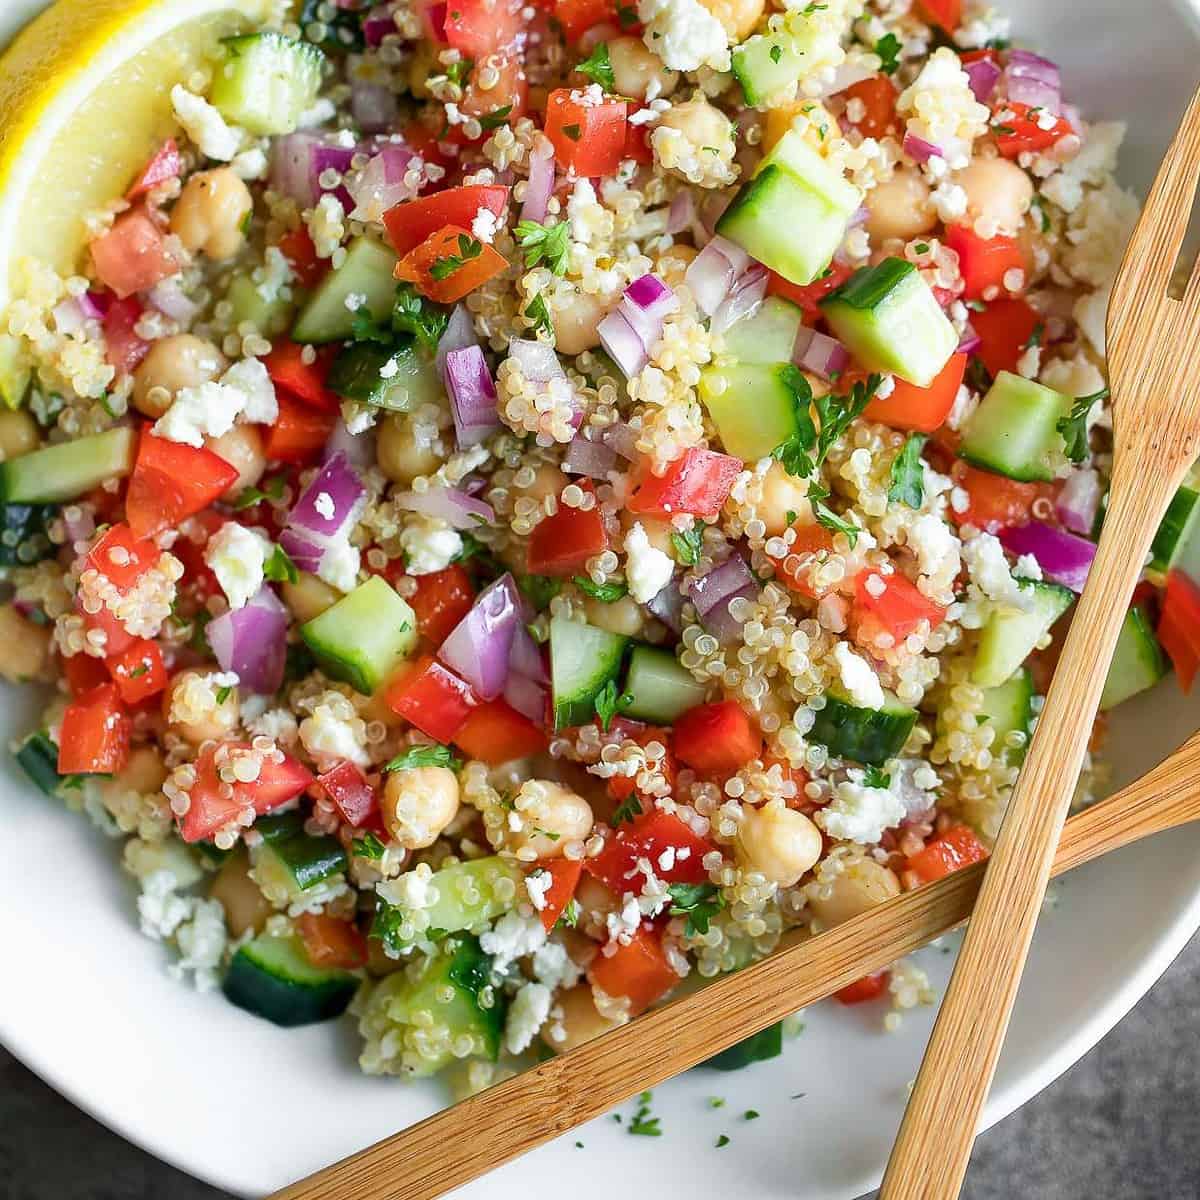  A colorful and healthy Vegan Greek Quinoa Salad to satisfy your taste buds!